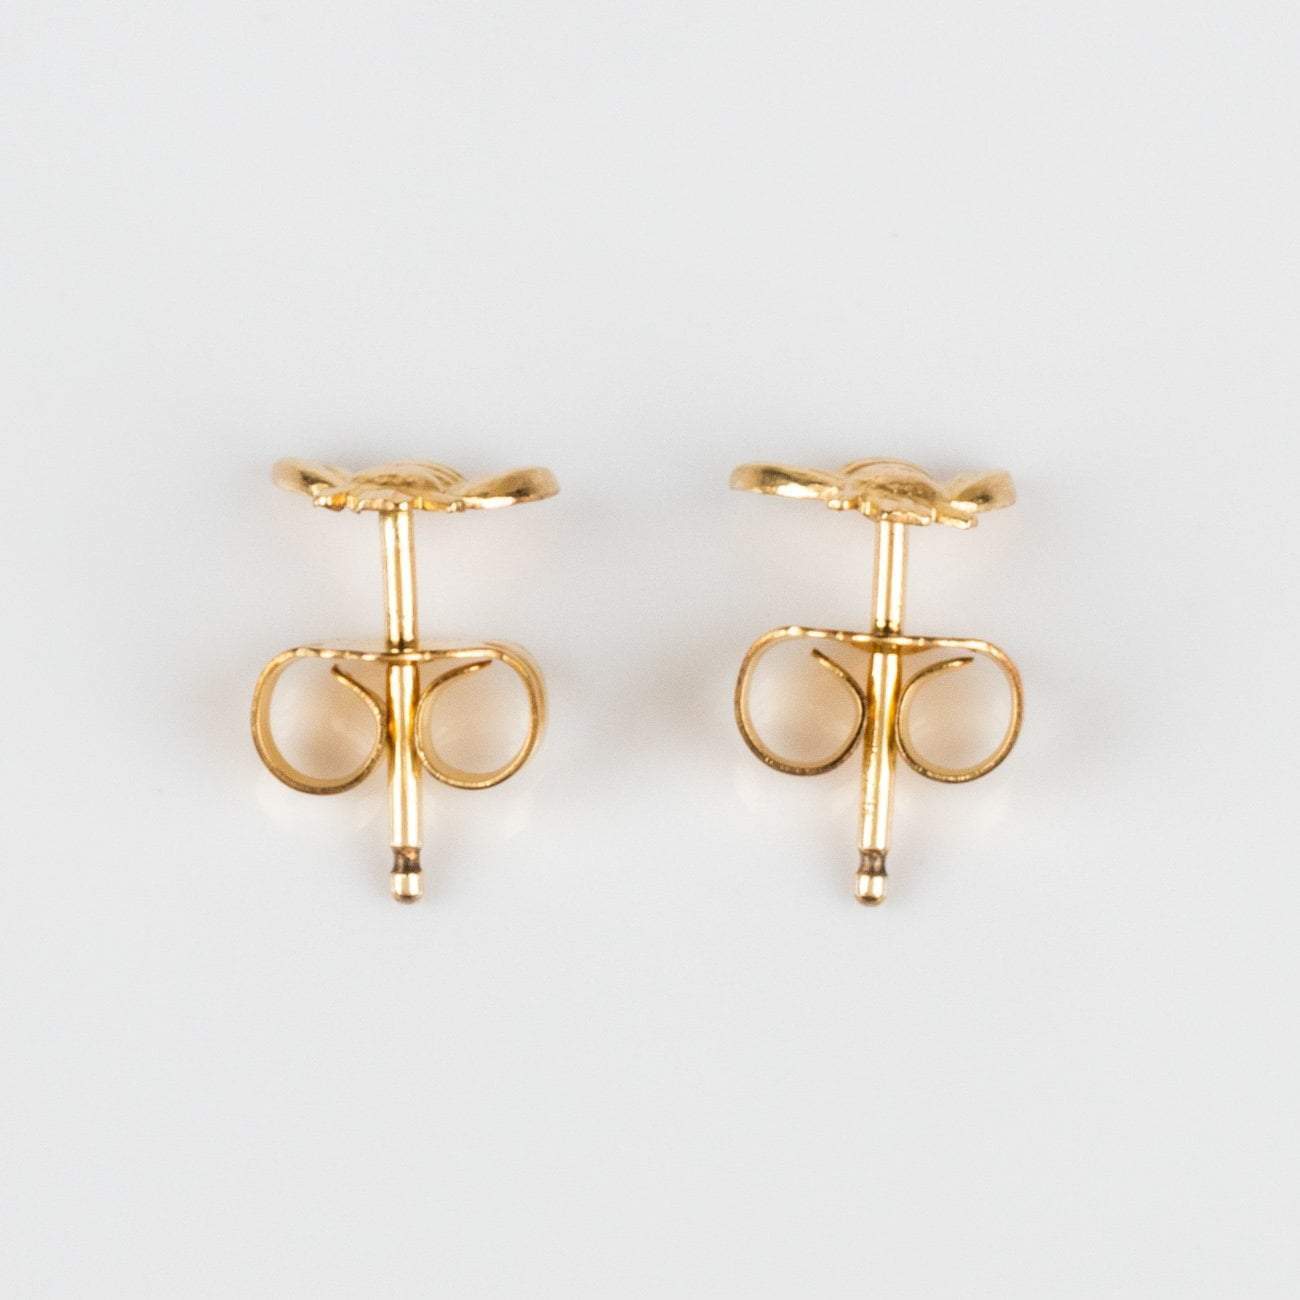 Local Eclectic Tiny Yellow Gold Bumble Bee Stud Earrings